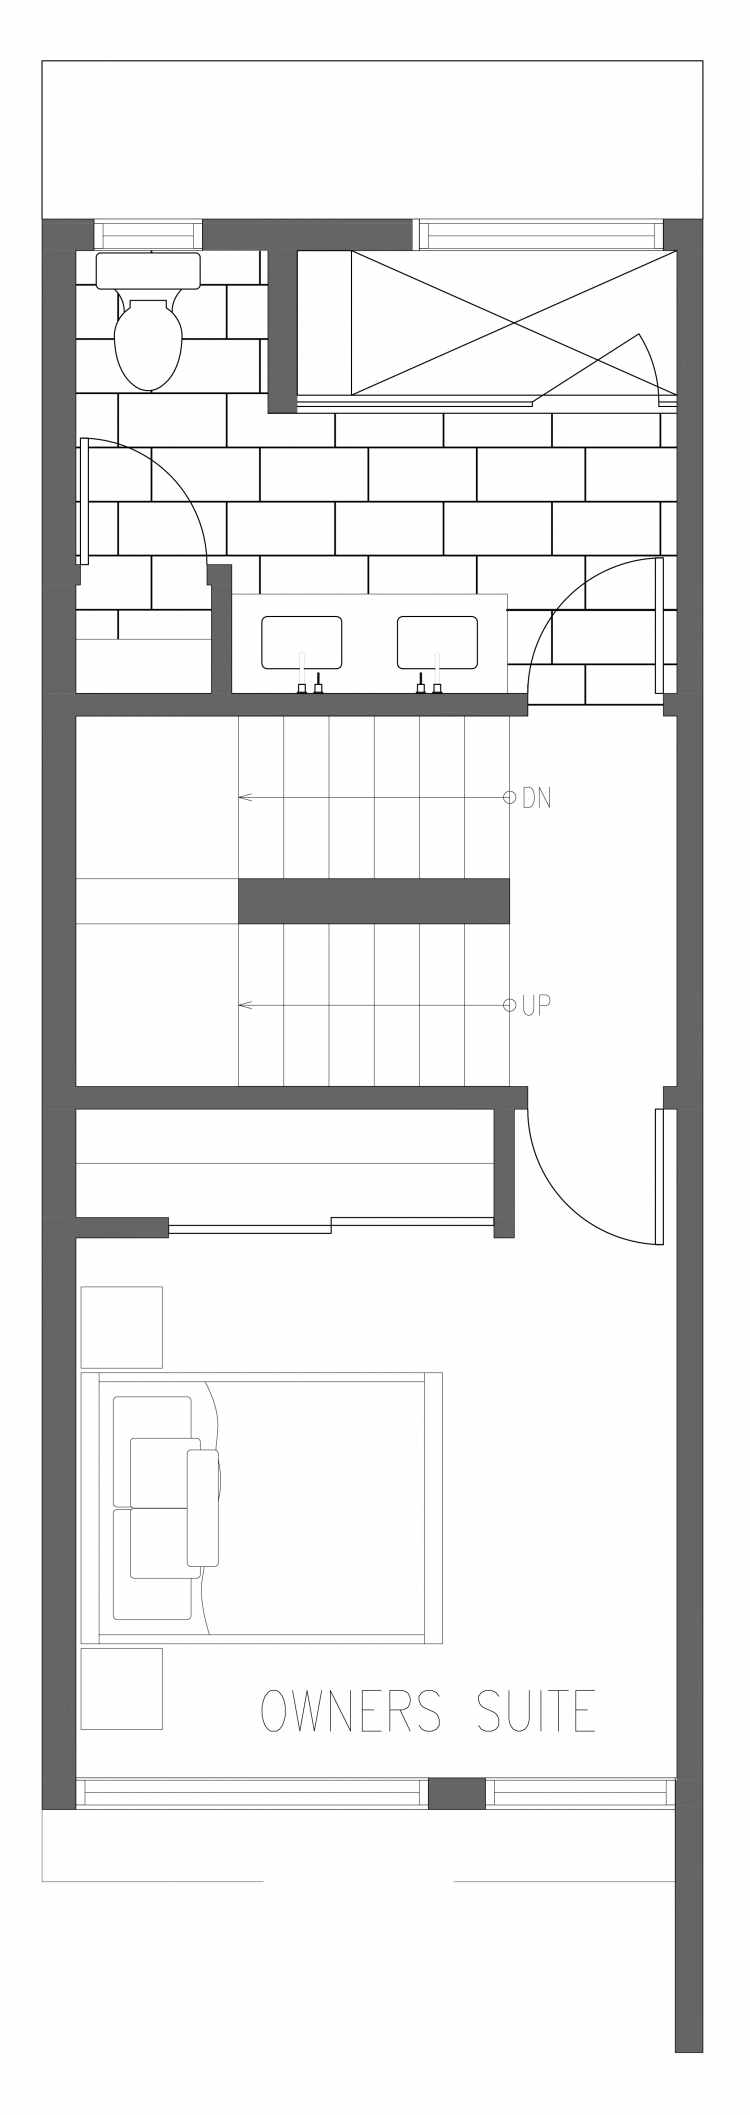 Third Floor Plan of 2363 Beacon Ave S, One of the Brea Townhomes in North Beacon Hill